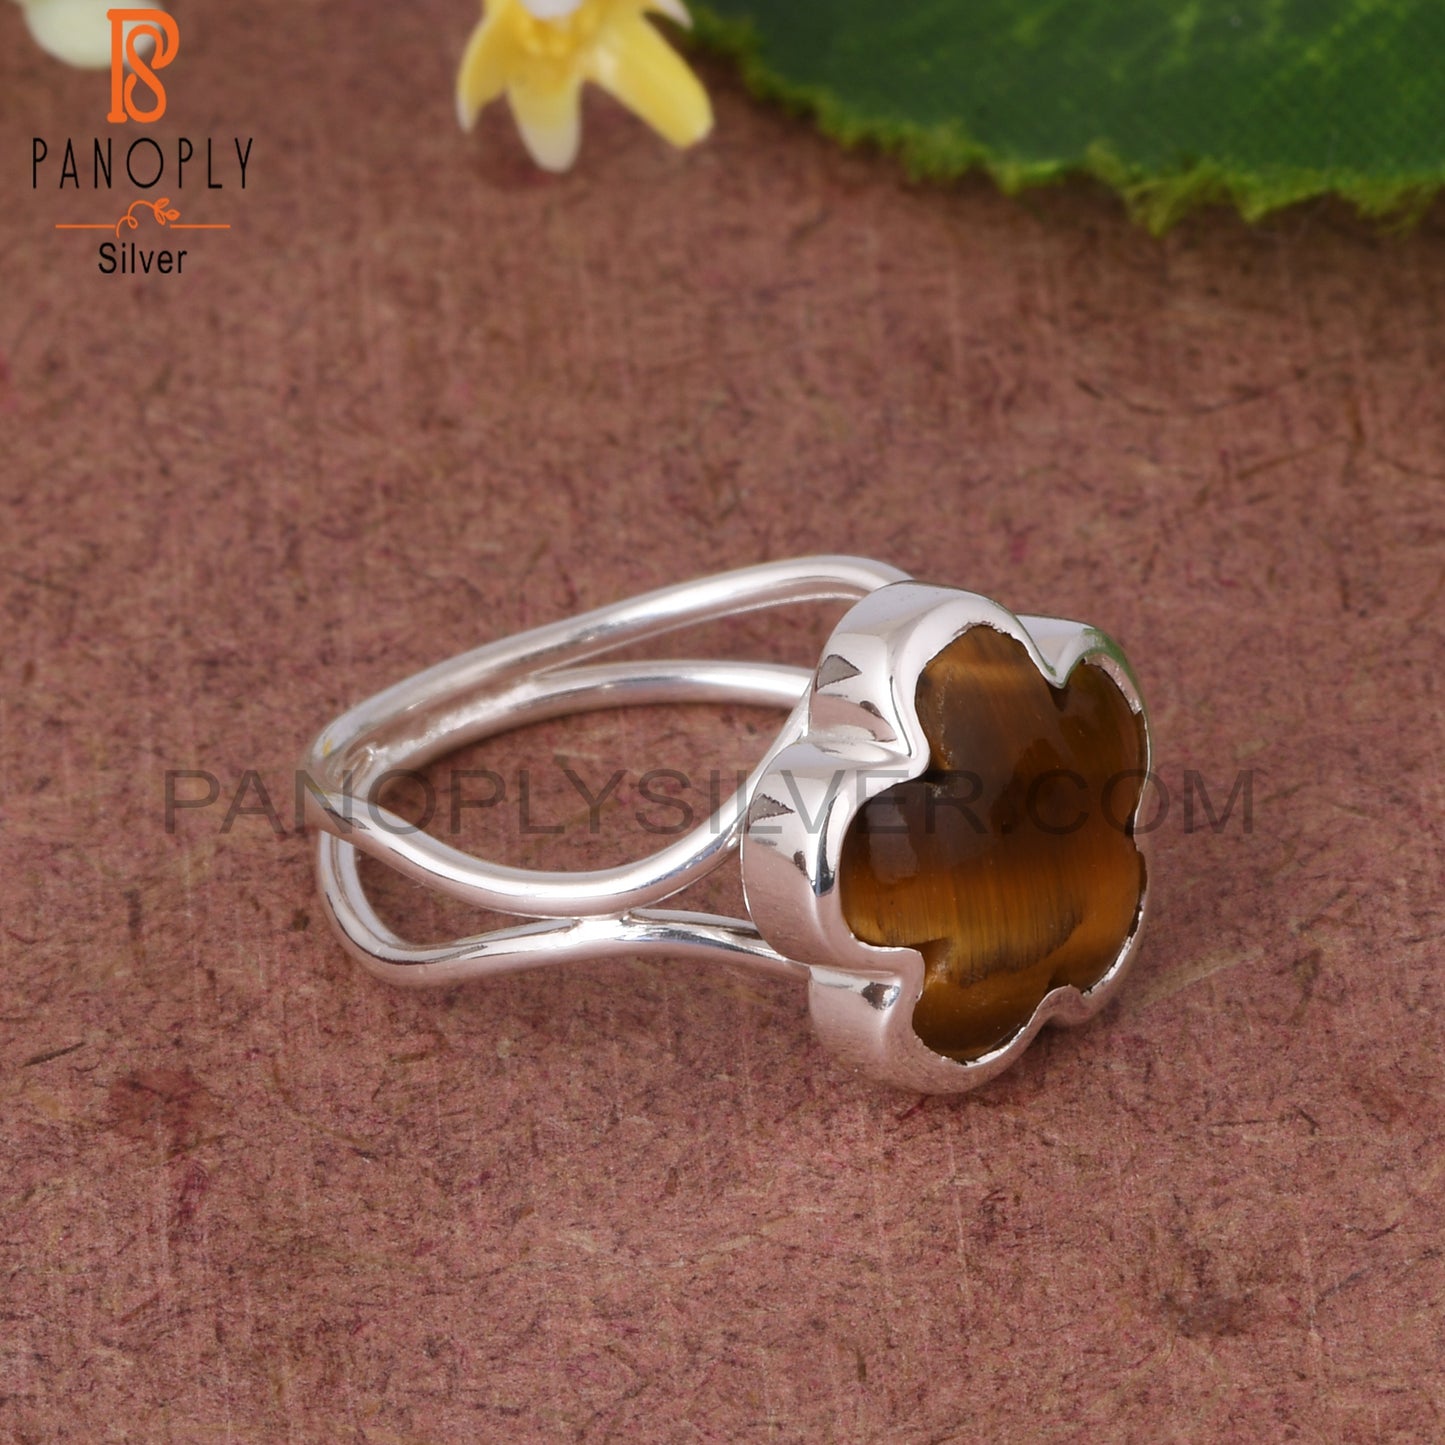 Tiger Eye Yellow Sunflower 925 Silver Two Band Ring